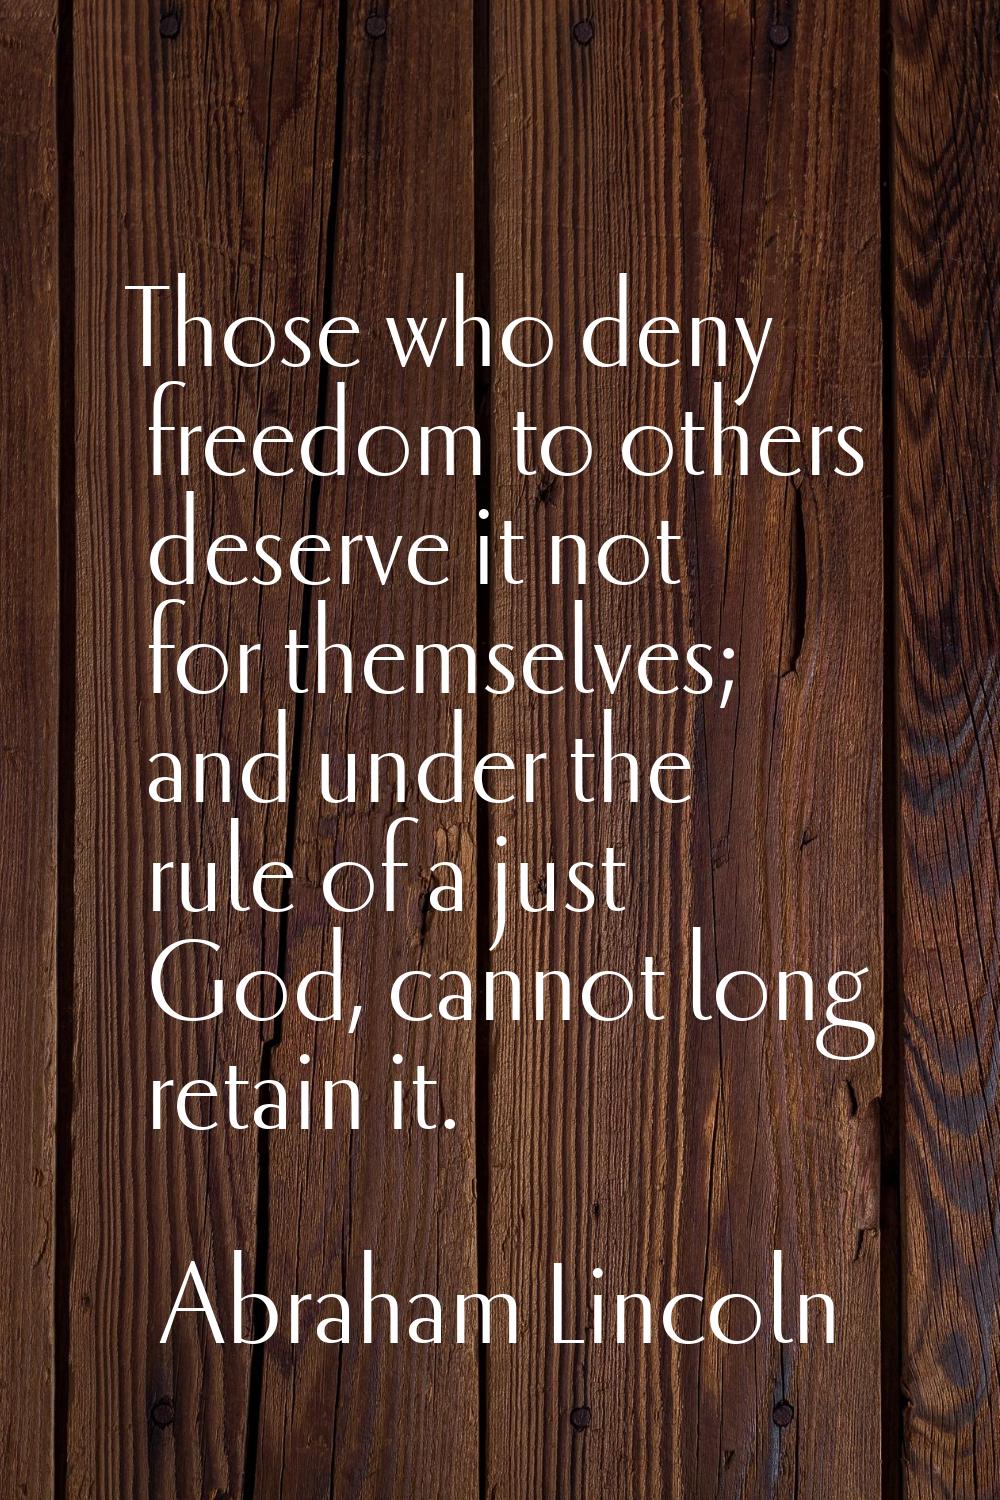 Those who deny freedom to others deserve it not for themselves; and under the rule of a just God, c